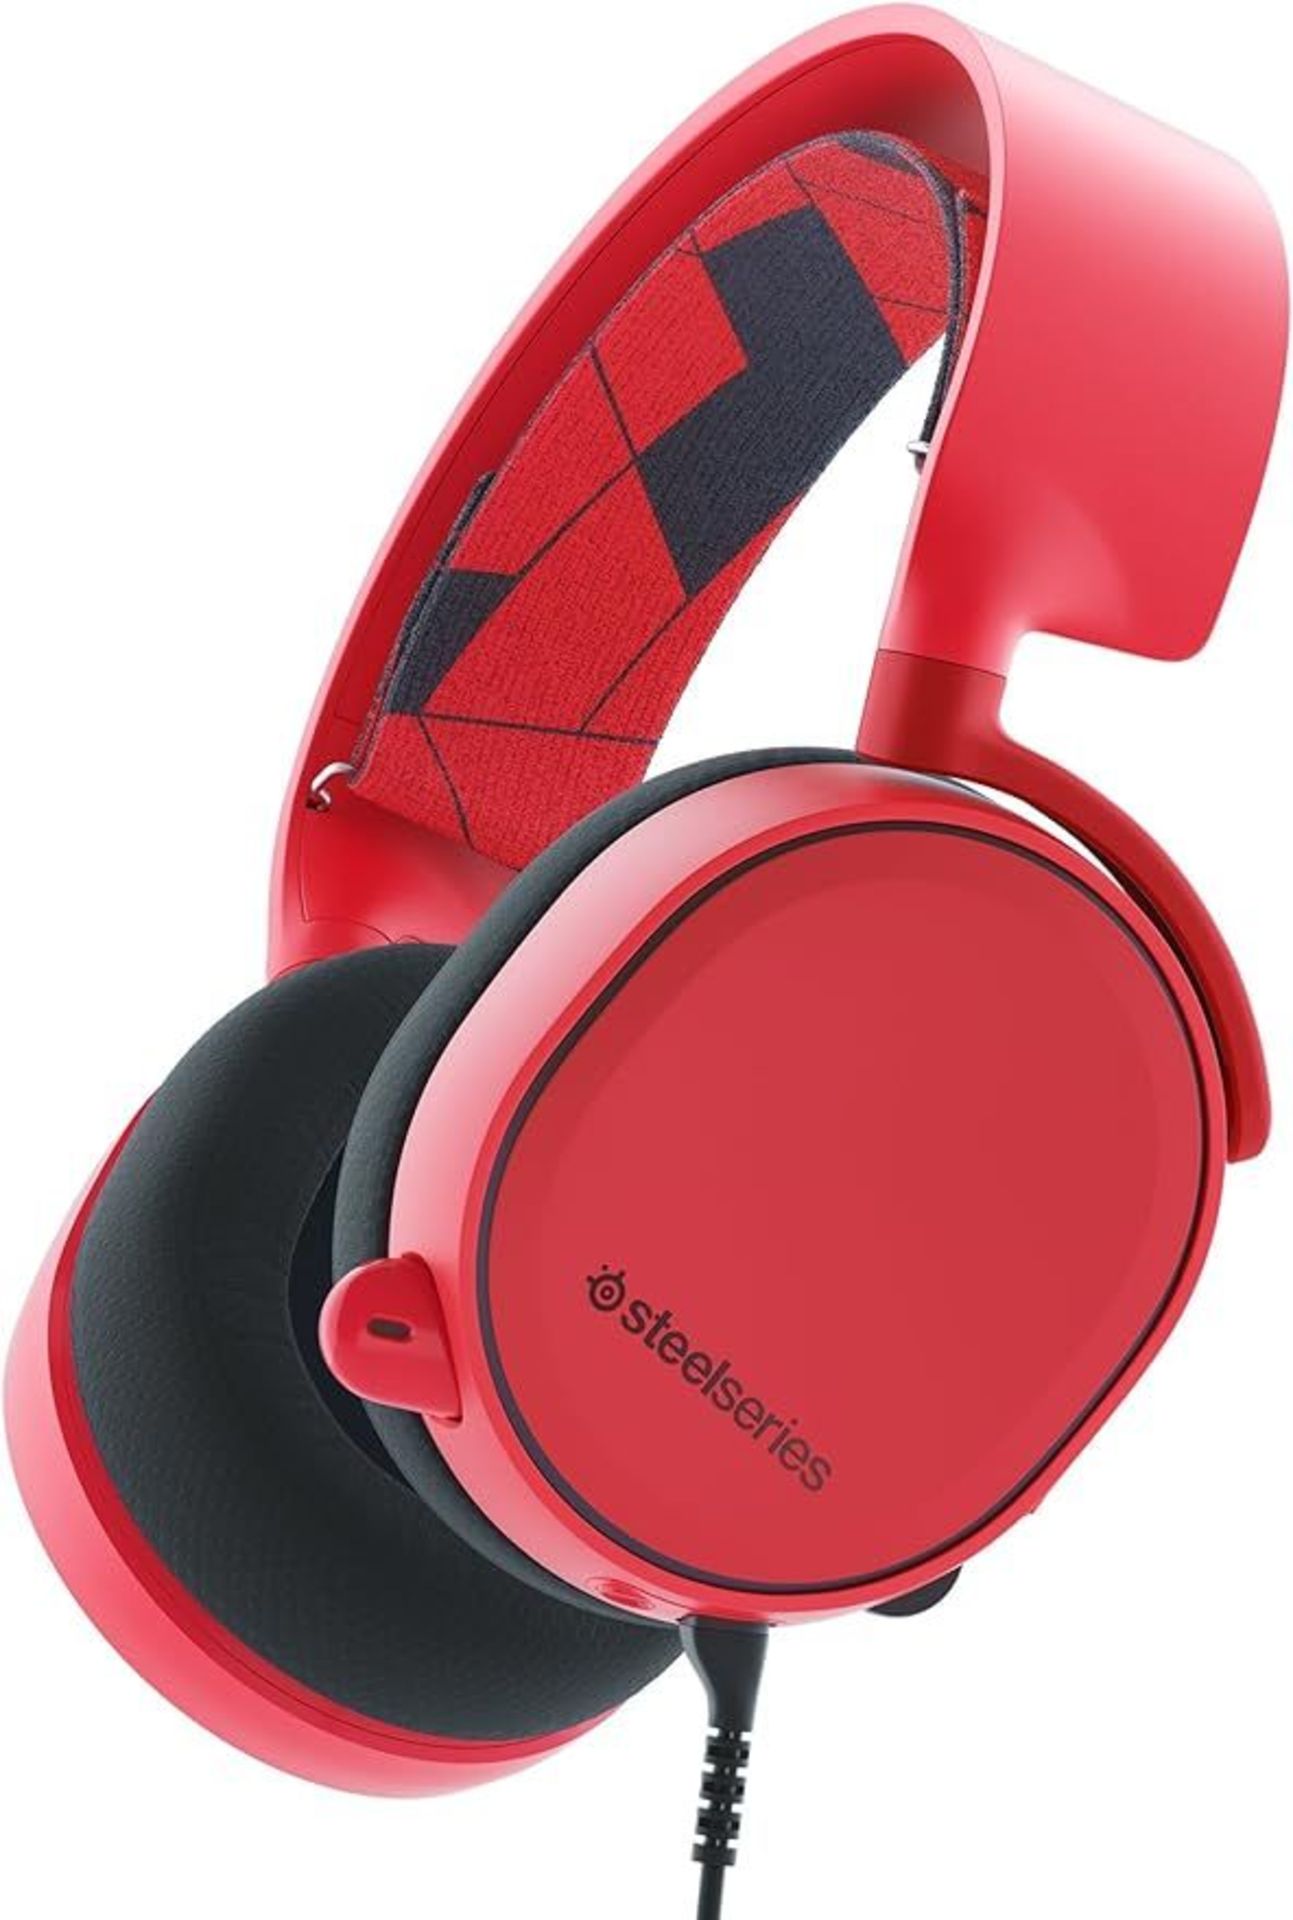 Steelseries Gaming Headset Arctis 3 Solar Red Limited Edition 7.1 Surround. All Platform